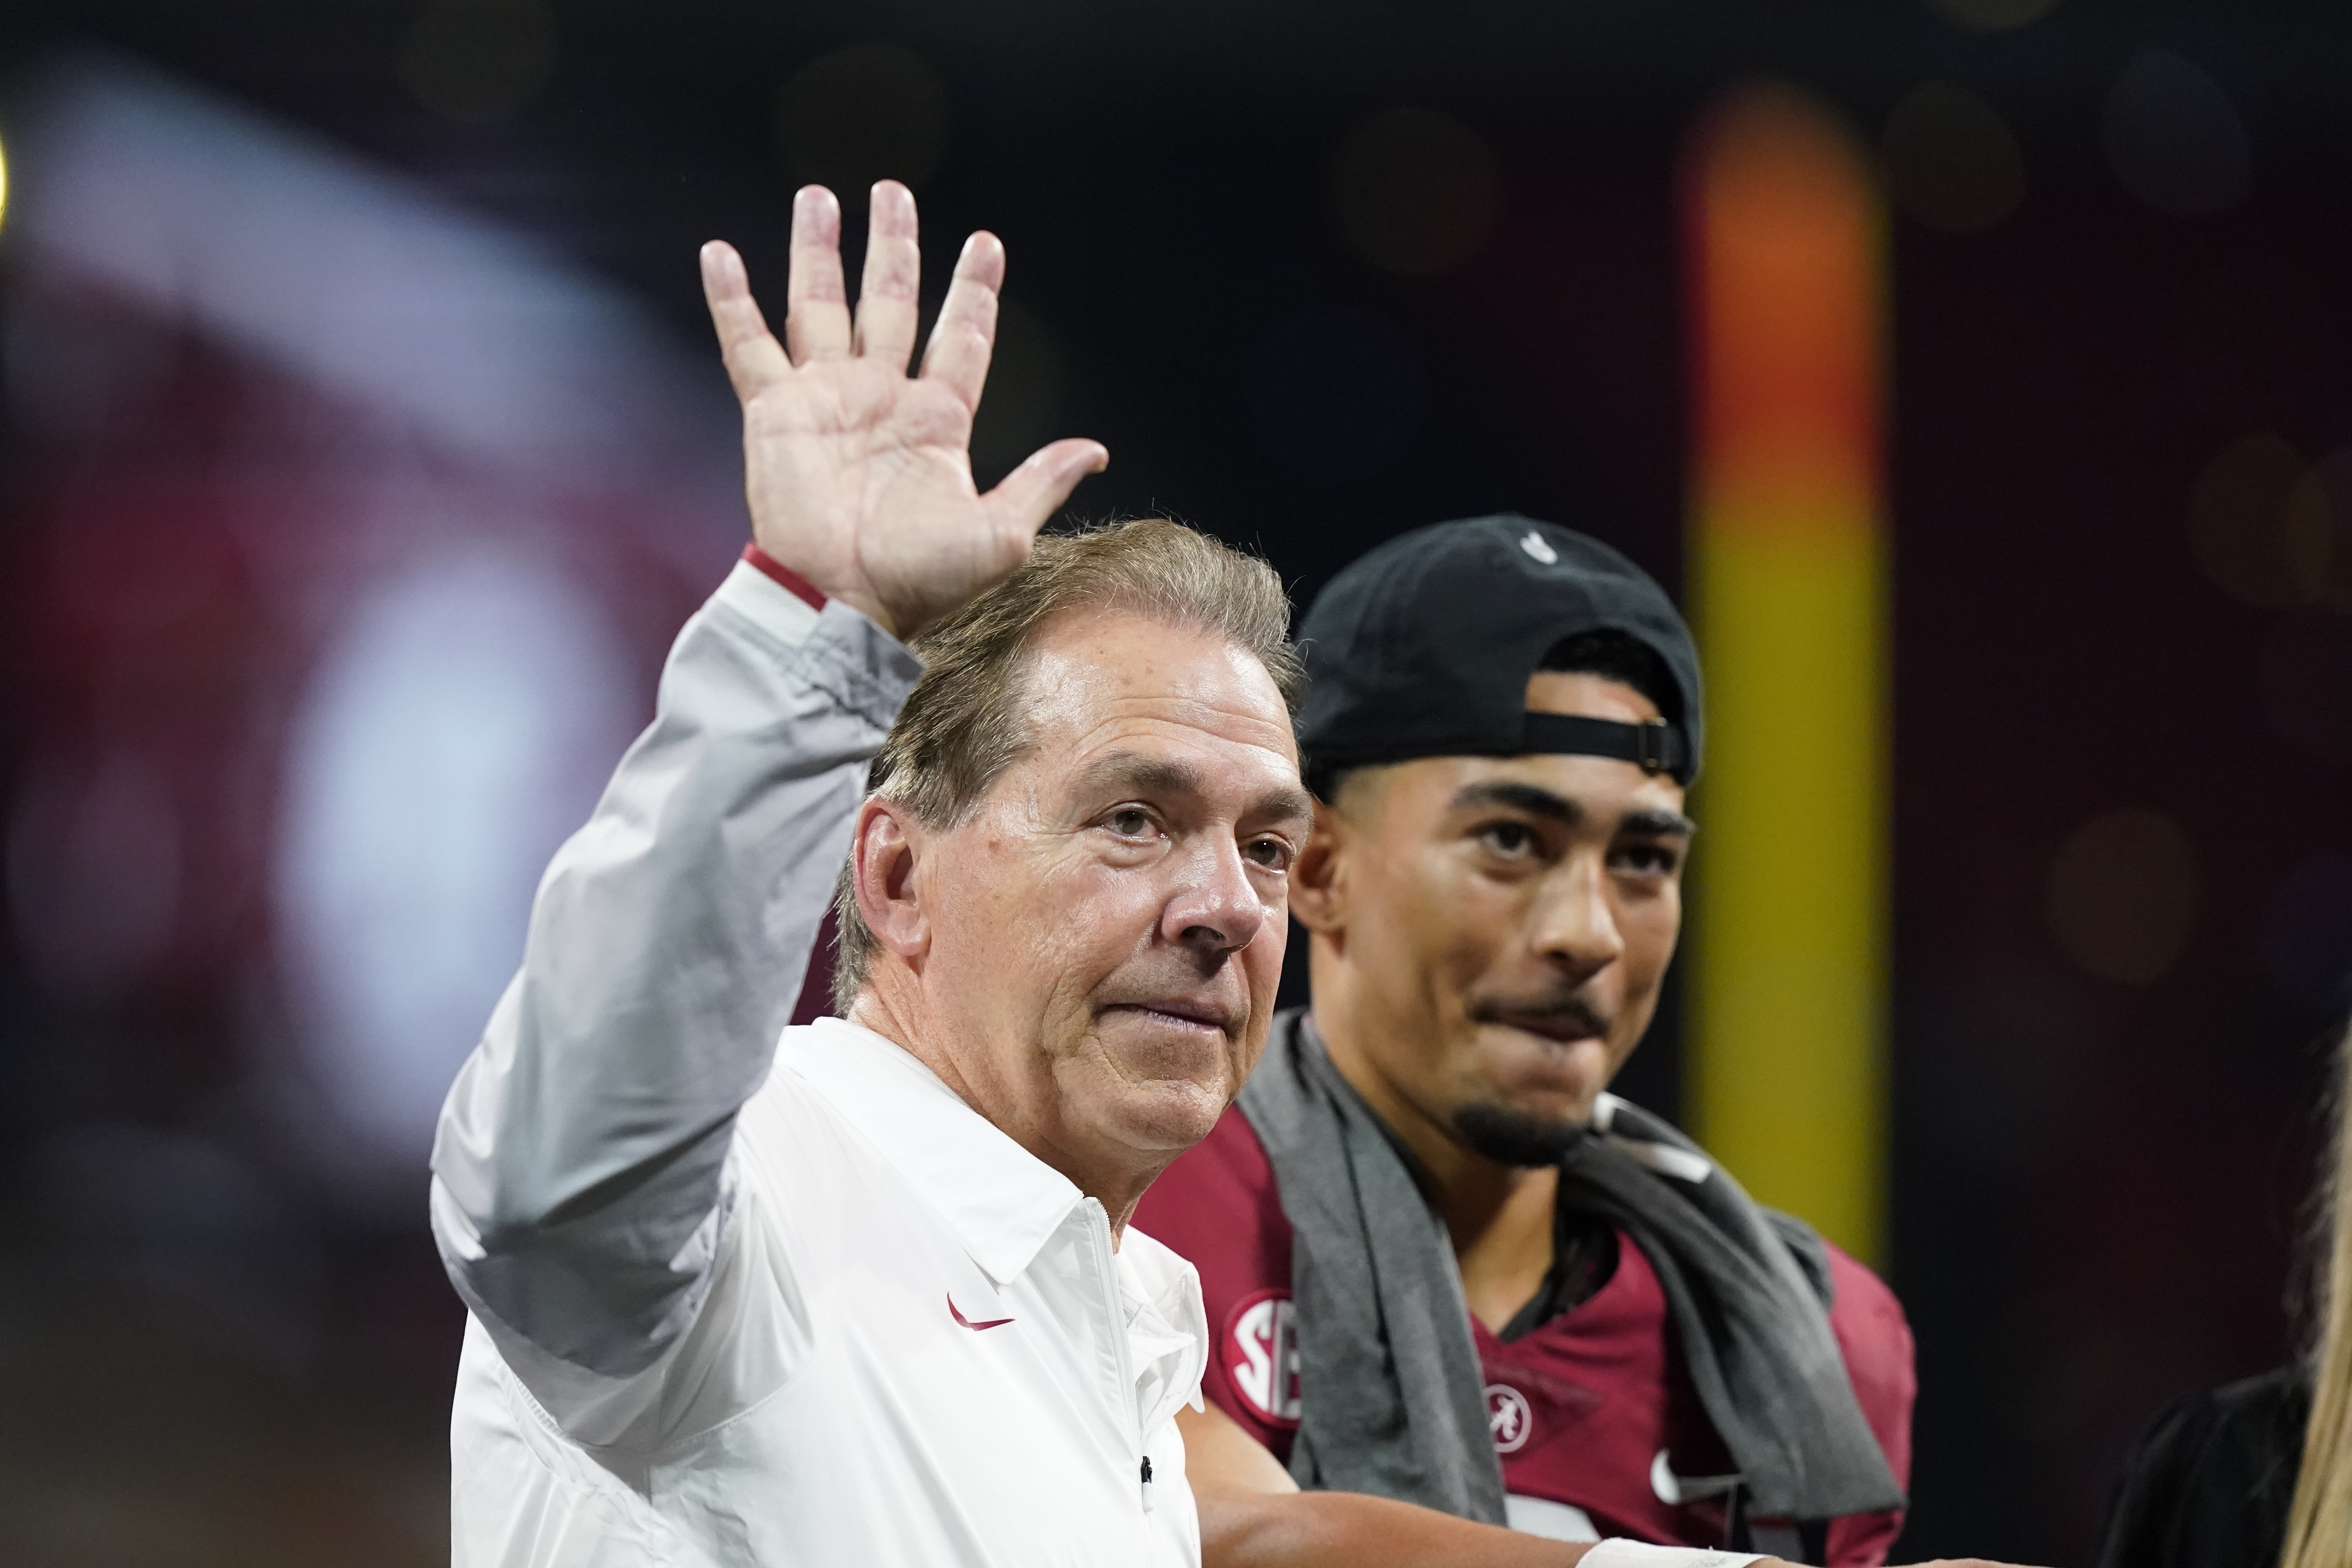 Nick Saban Says Alabama 'Maybe' Gained 'a Little Respect' After SEC Championship Win thumbnail